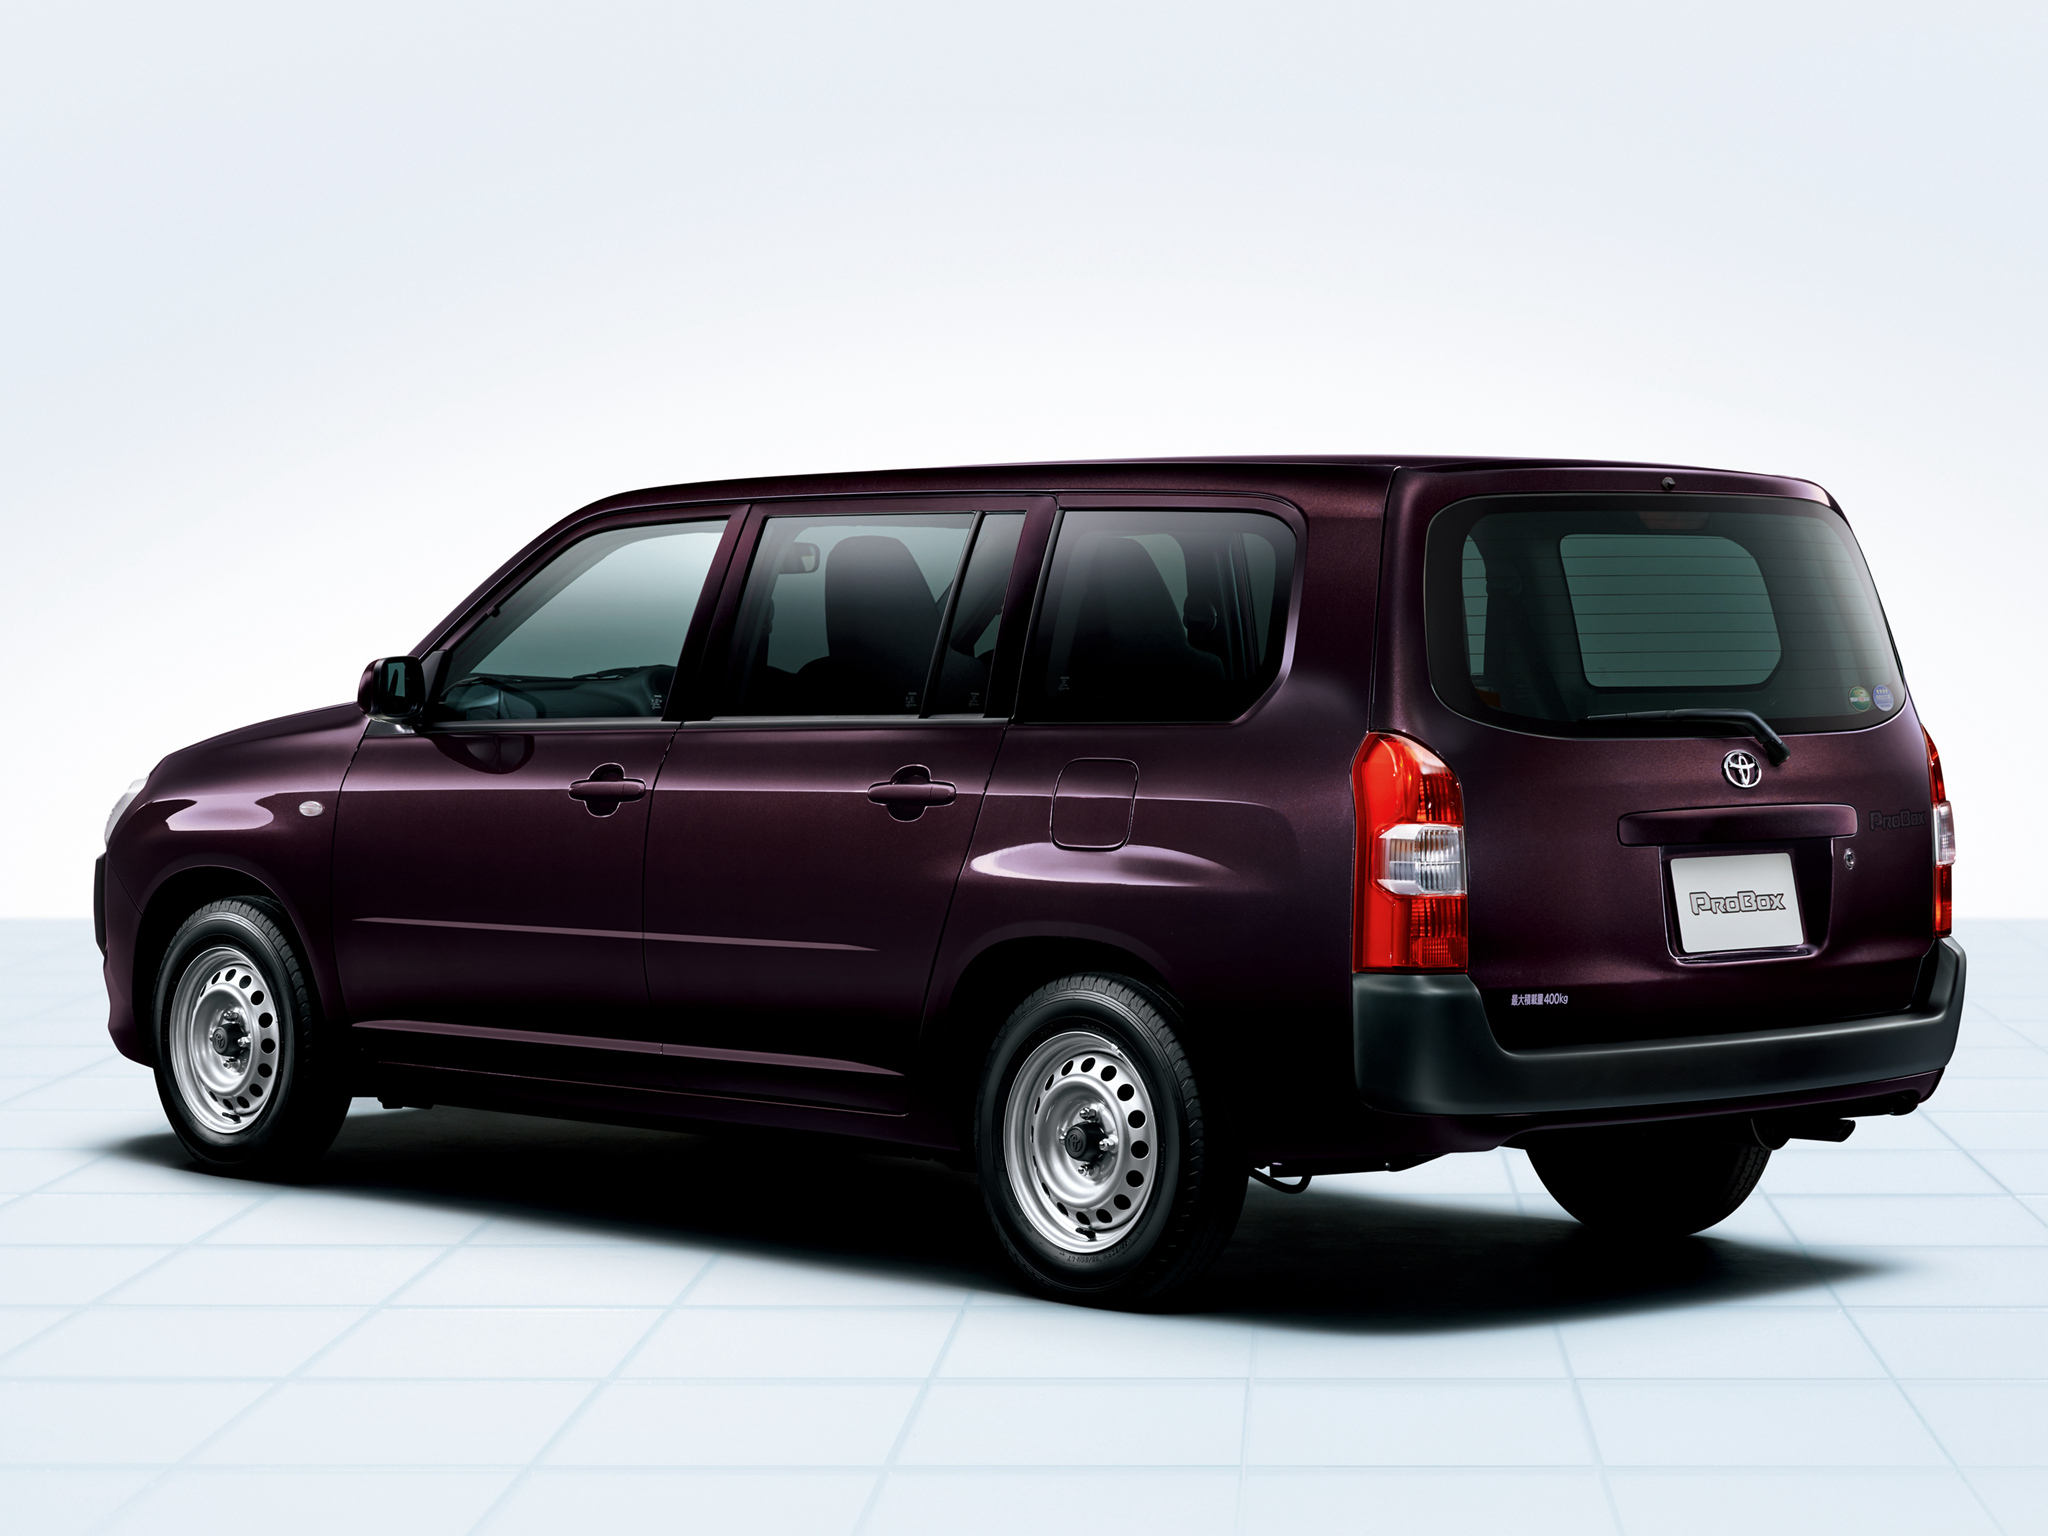 Toyota Launches New 2014 Probox And Succeed In Japan Autoevolution